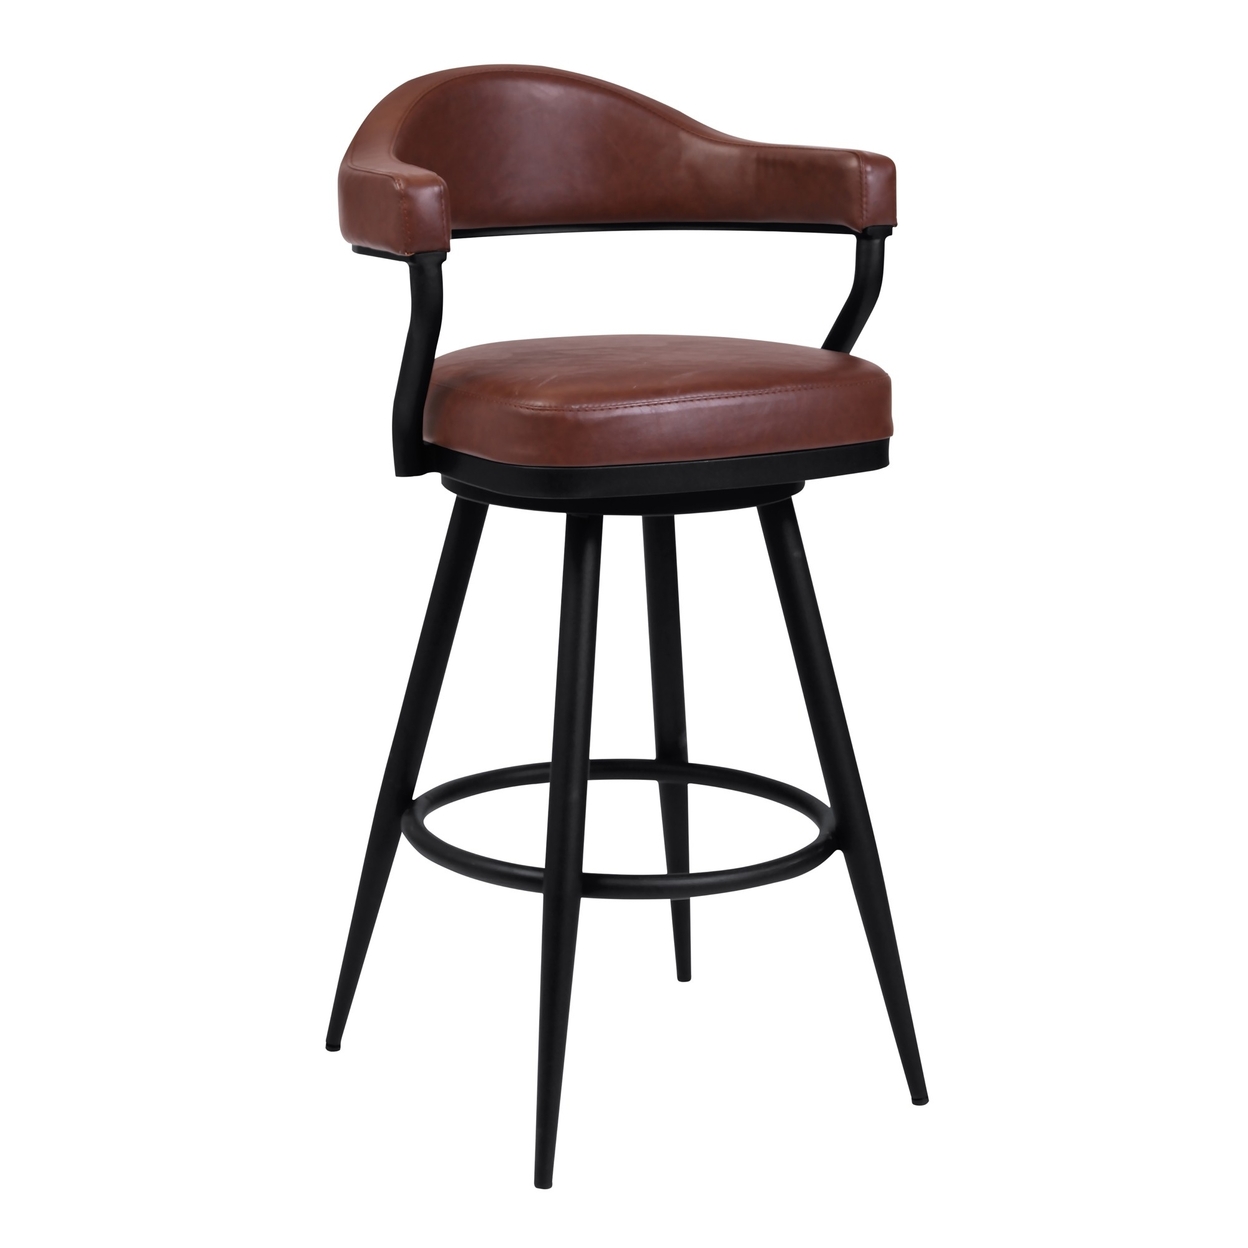 Knw 30 Inch Swivel Barstool Armchair, Camel, Vintage Brown Faux Leather- Saltoro Sherpi